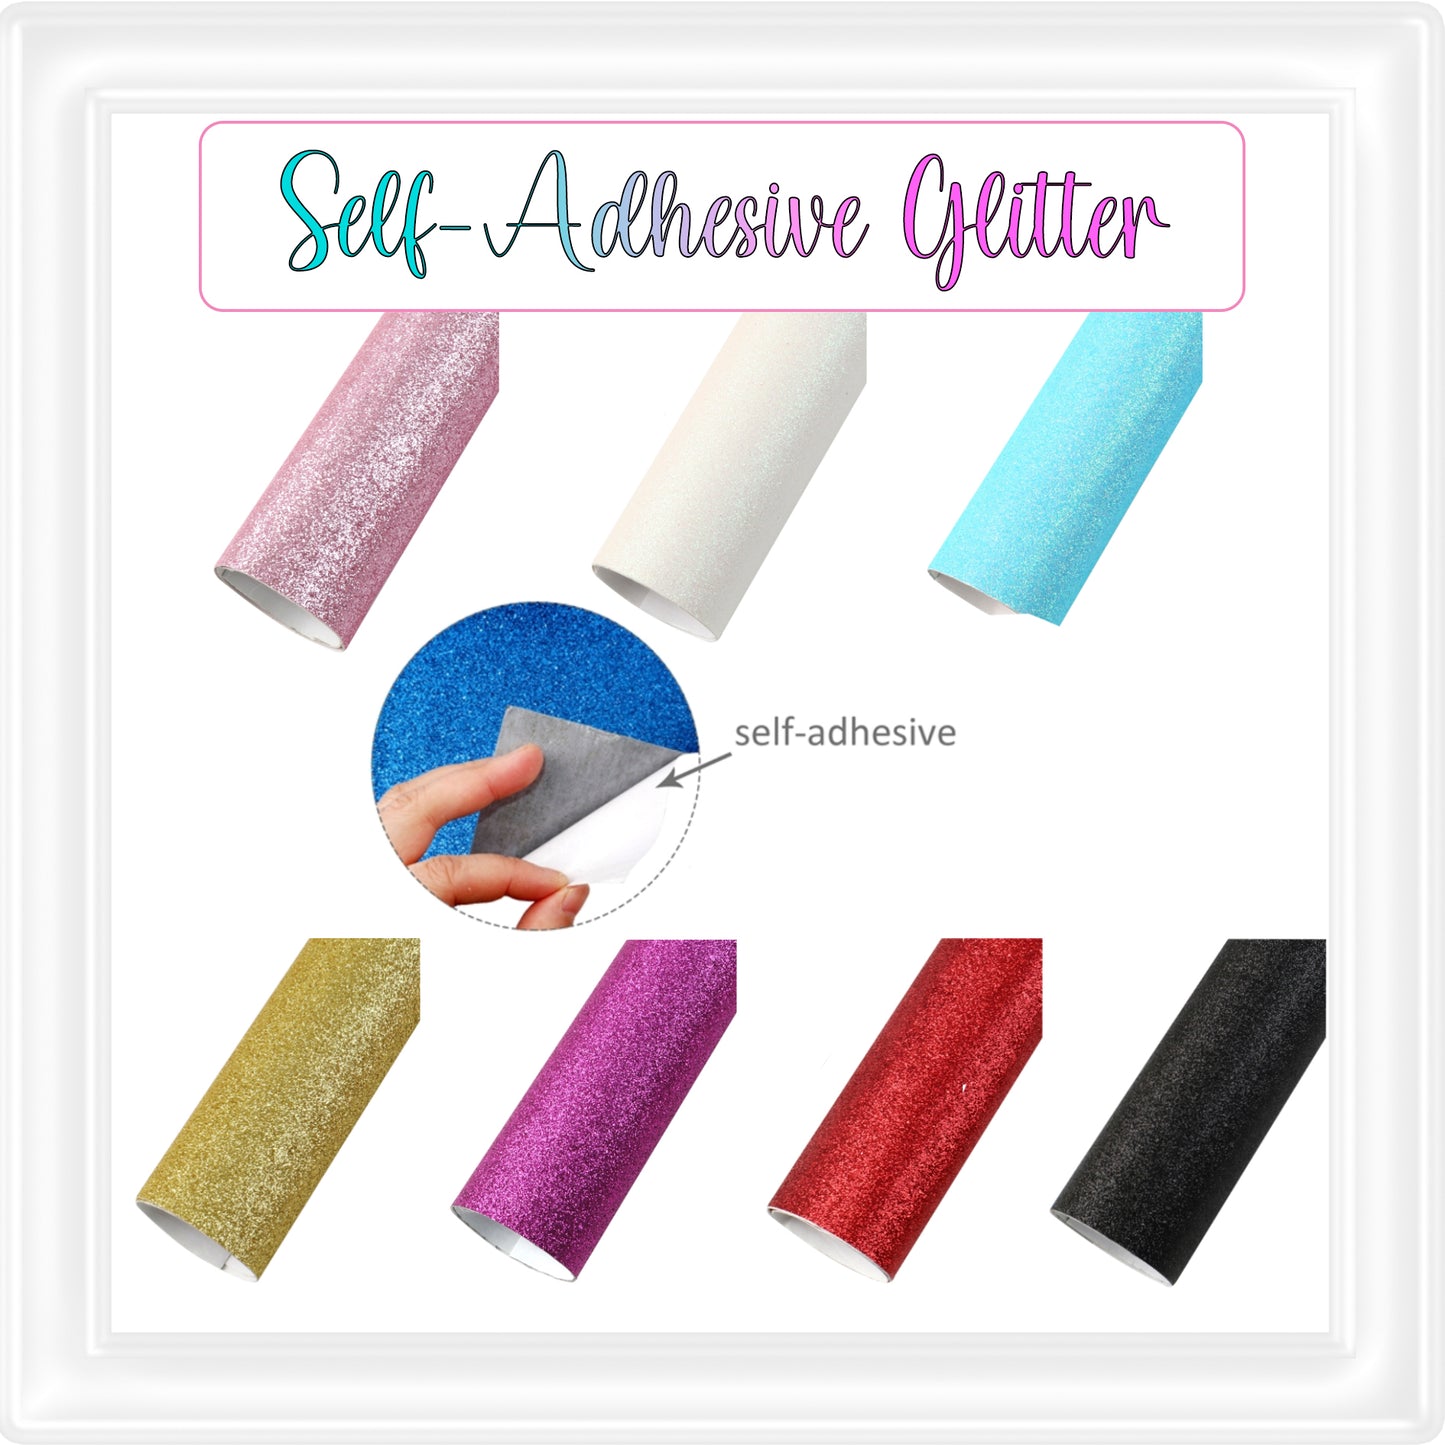 ⋅ Self-Adhesive Backed Fine Glitter ⋅ For Double-Sided Projects ⋅ BLUE ⋅